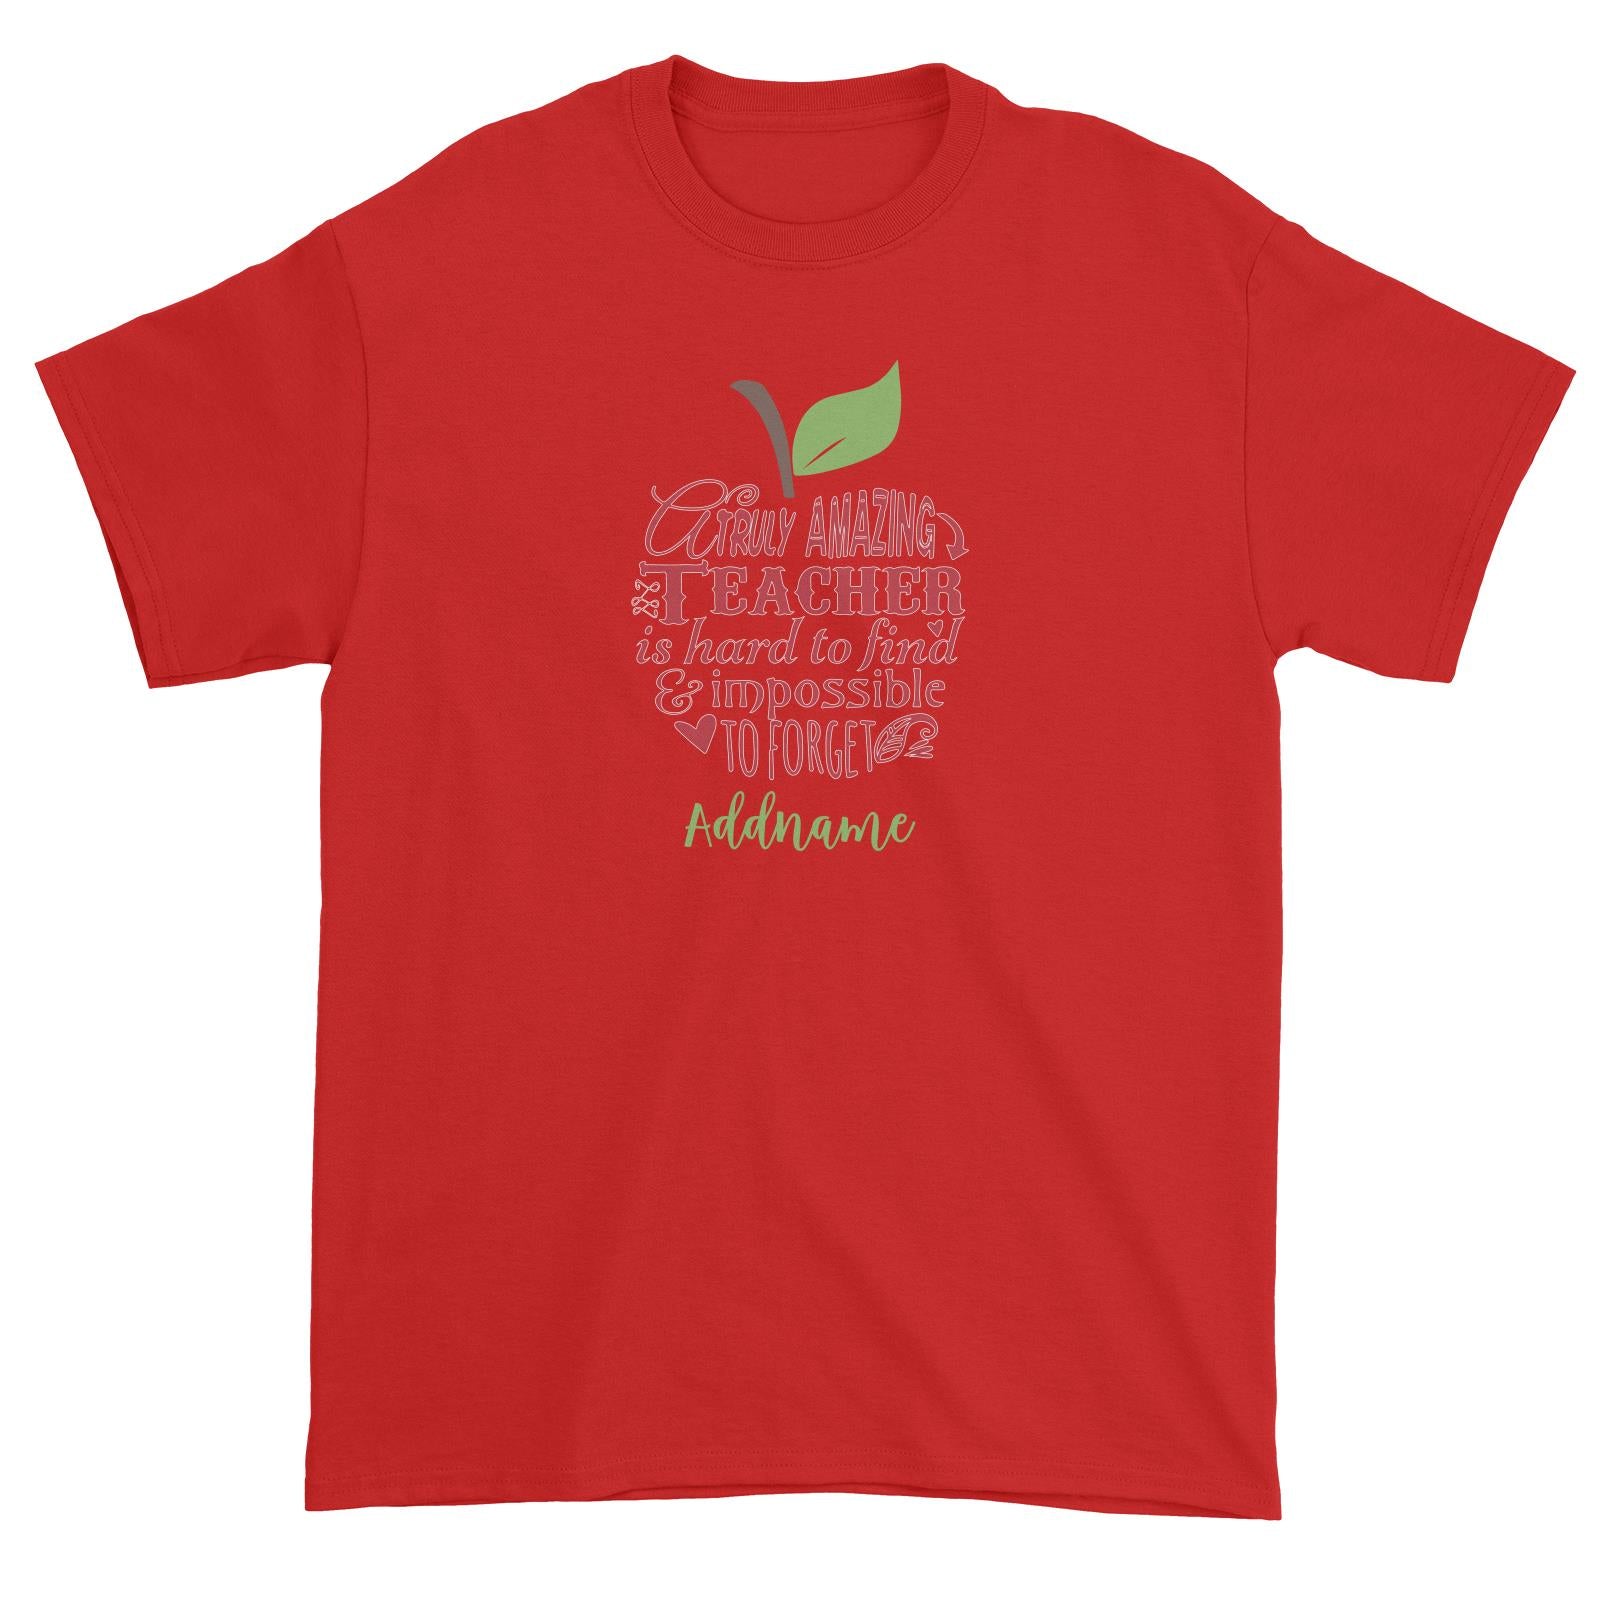 Teacher Apple Truly Amazing Teacher is Had To Find & Impossible To Forget Addname Unisex T-Shirt